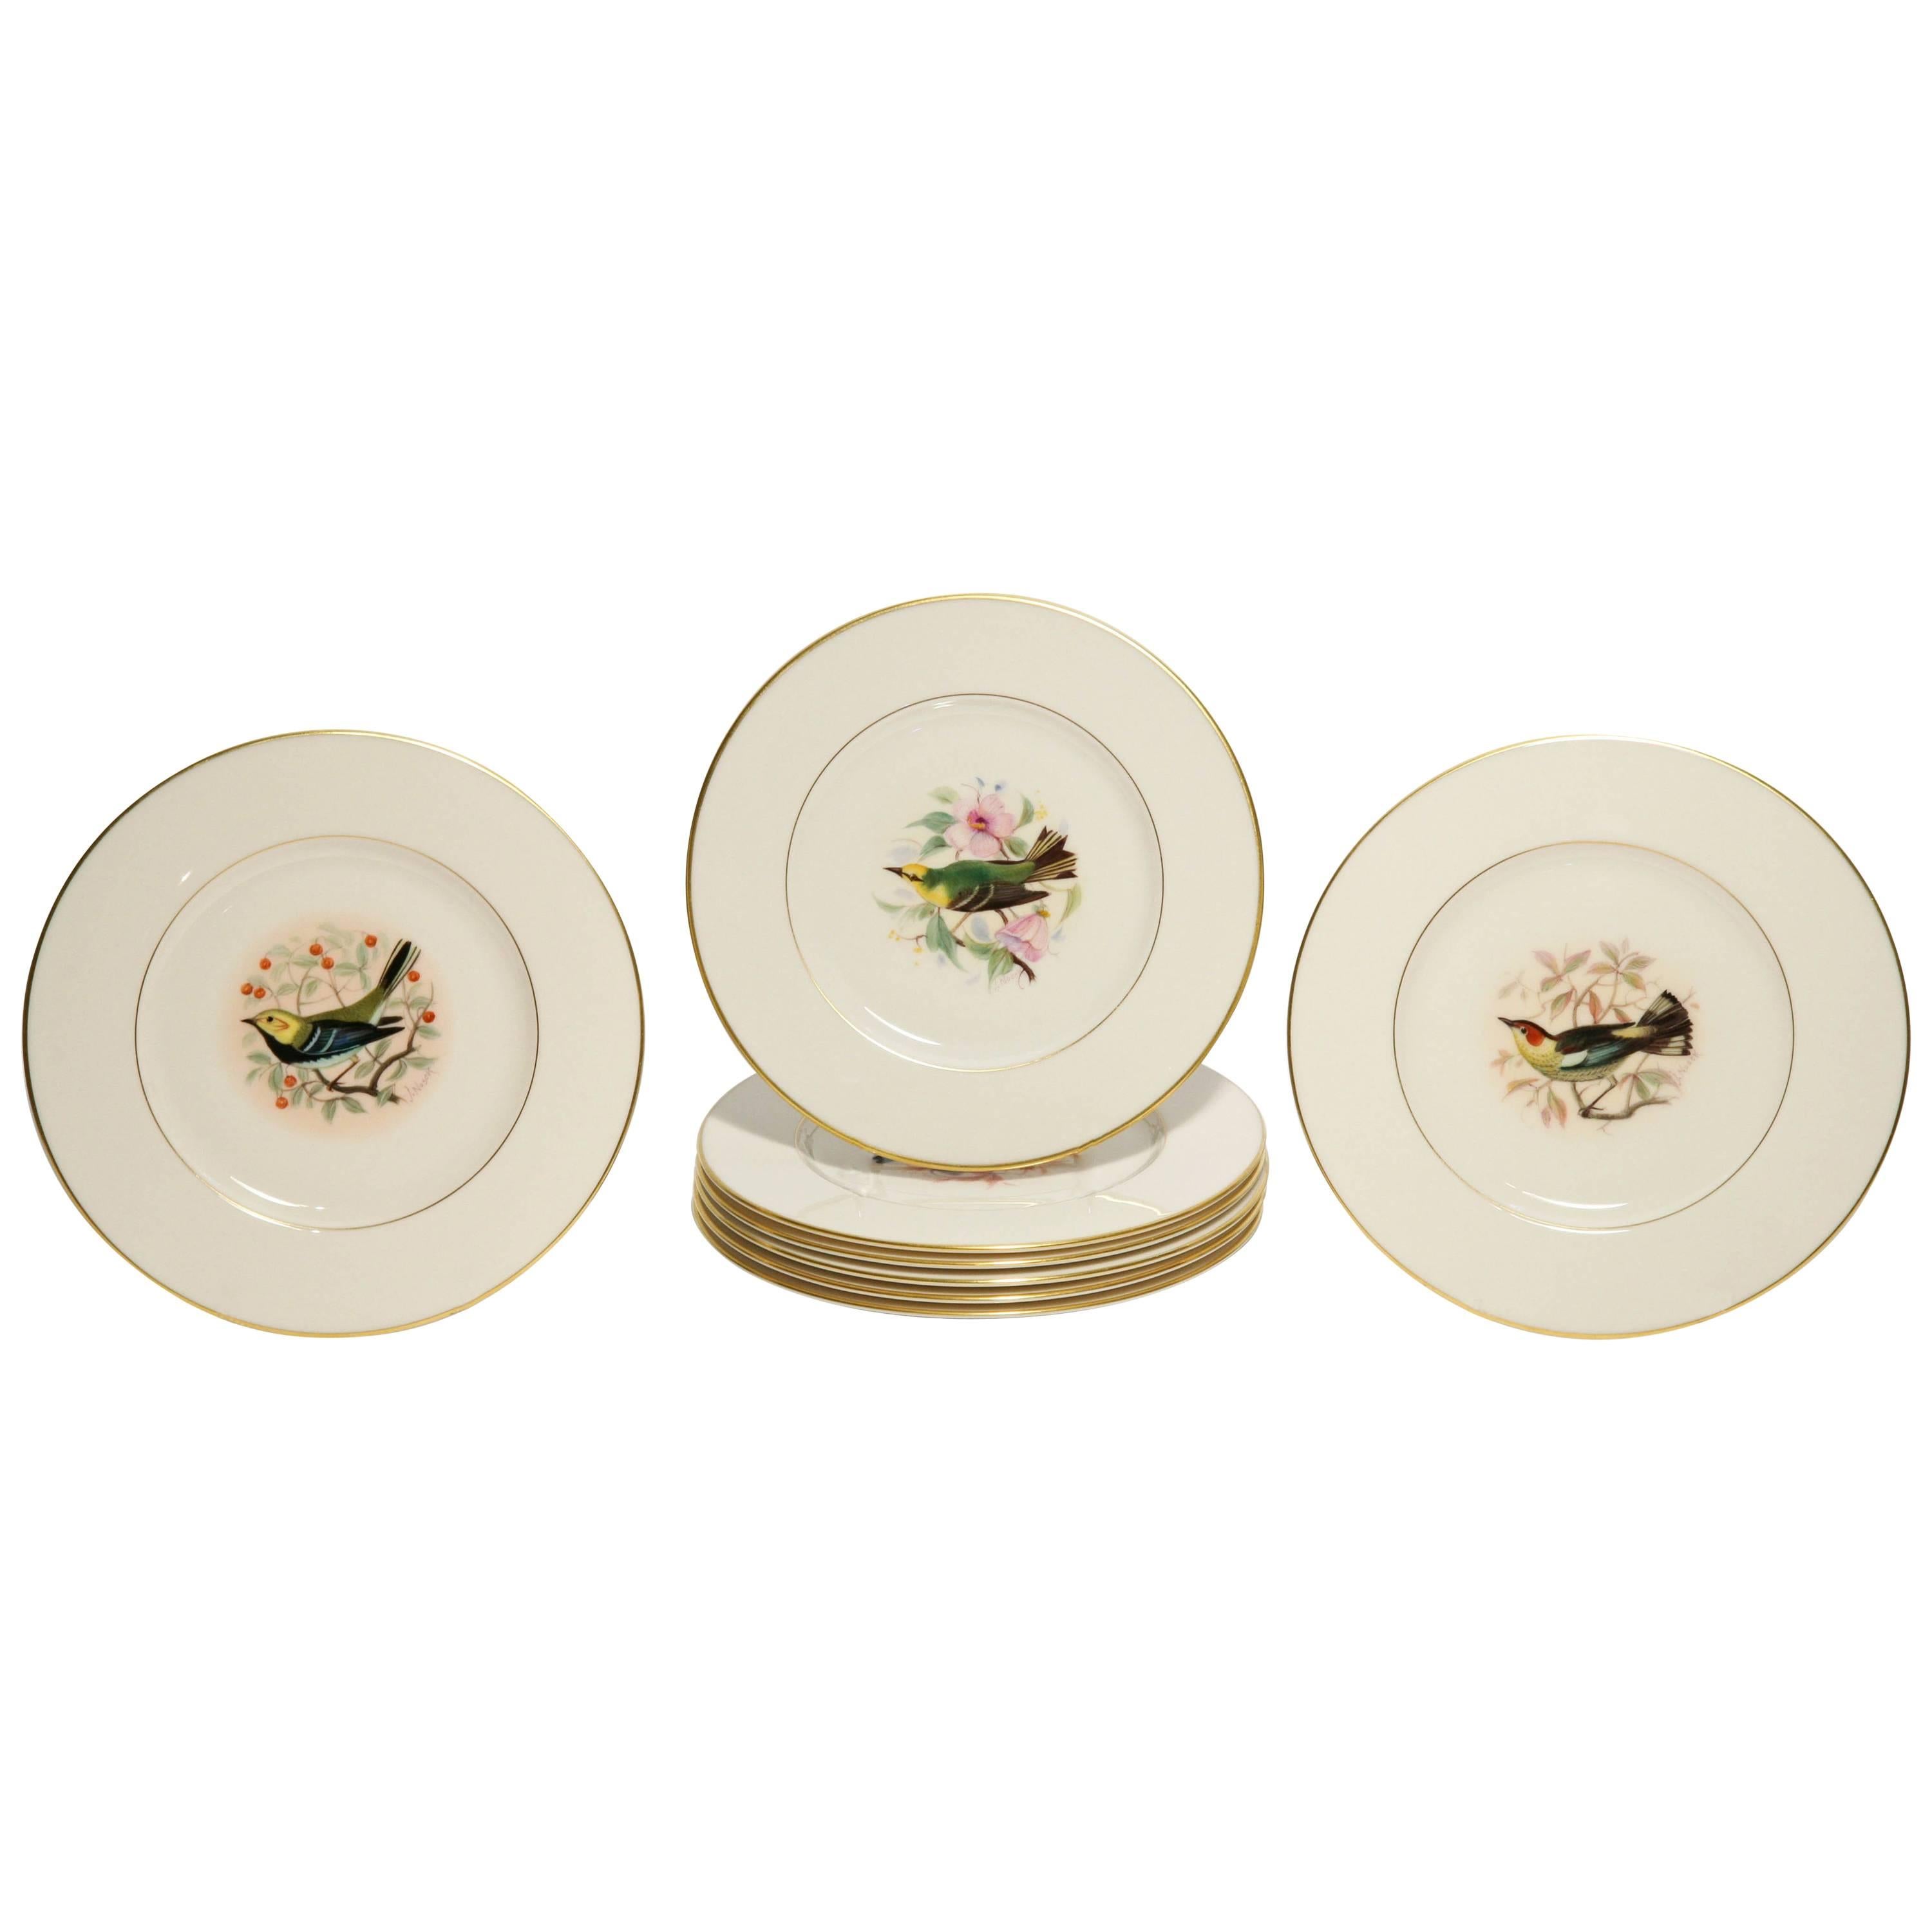 A very pretty set of vintage porcelain plates that would be perfect for first course, salad or desserts. These would also certainly enhance a cabinet or wall display too. Created by Jan Nosek, one of Lenox's premier artisans. Please see our matching